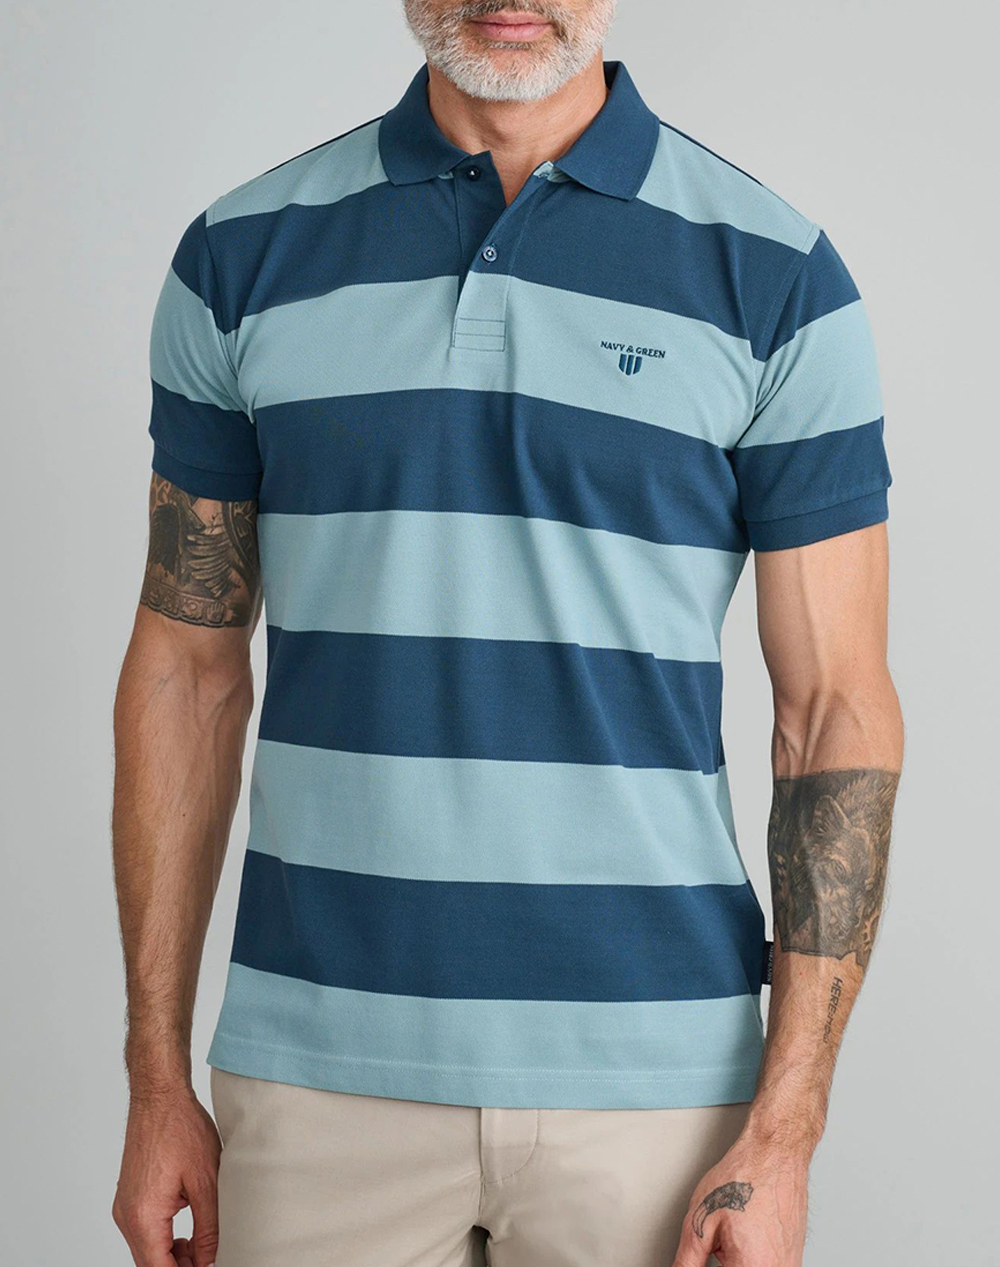 NAVY&GREEN POLO ΜΠΛΟΥΖΑΚΙ 24GE.1025-MOROCCAN BLUE/ TURQUOISE Turquoise